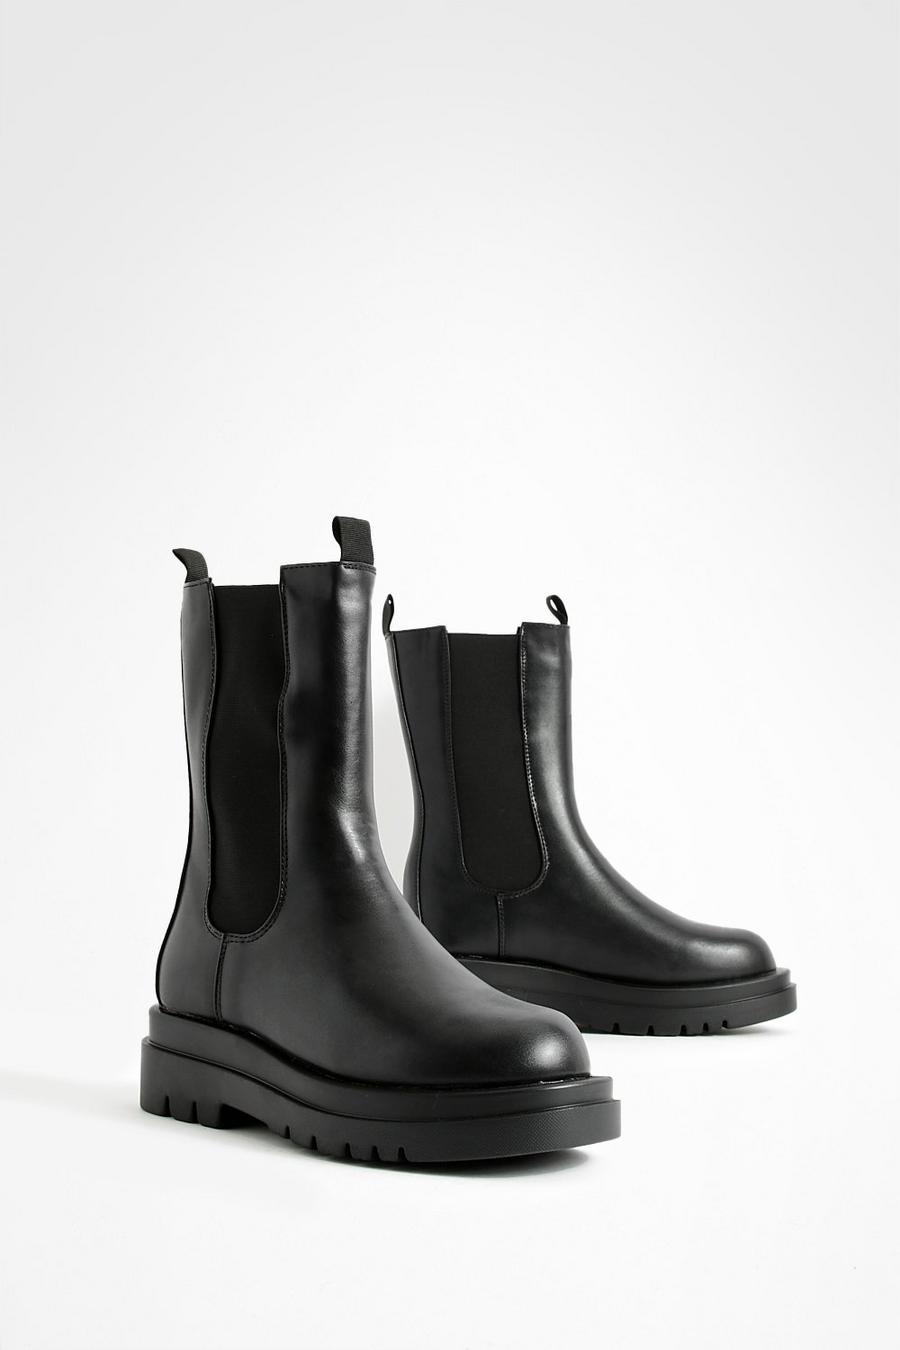 Black Chunky Cleated Calf High Chelsea Boots